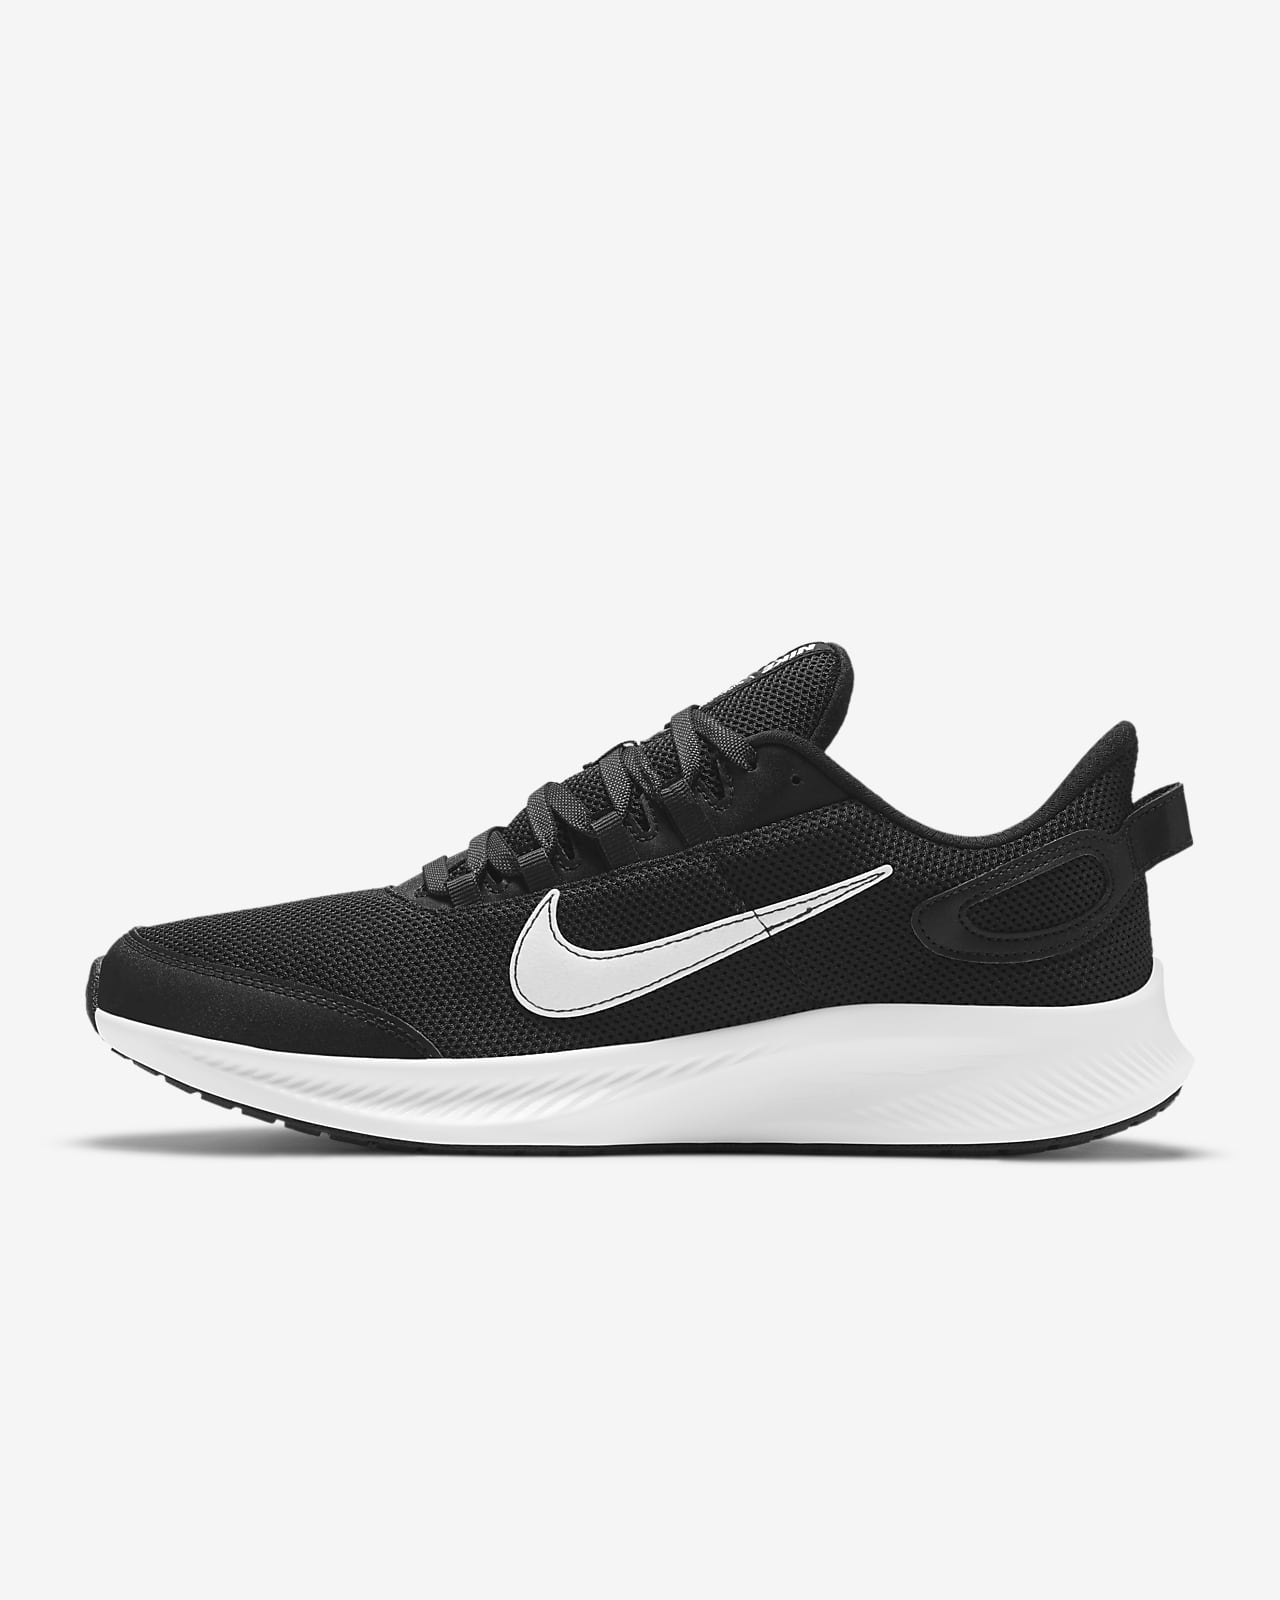 which nike running shoes